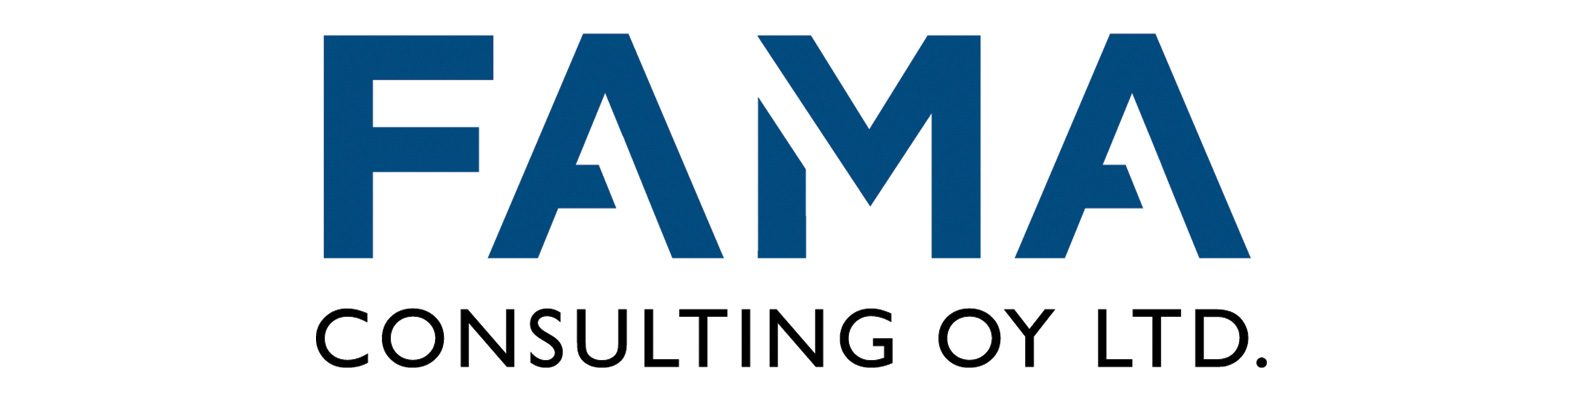 Fama Consulting Oy Ltd